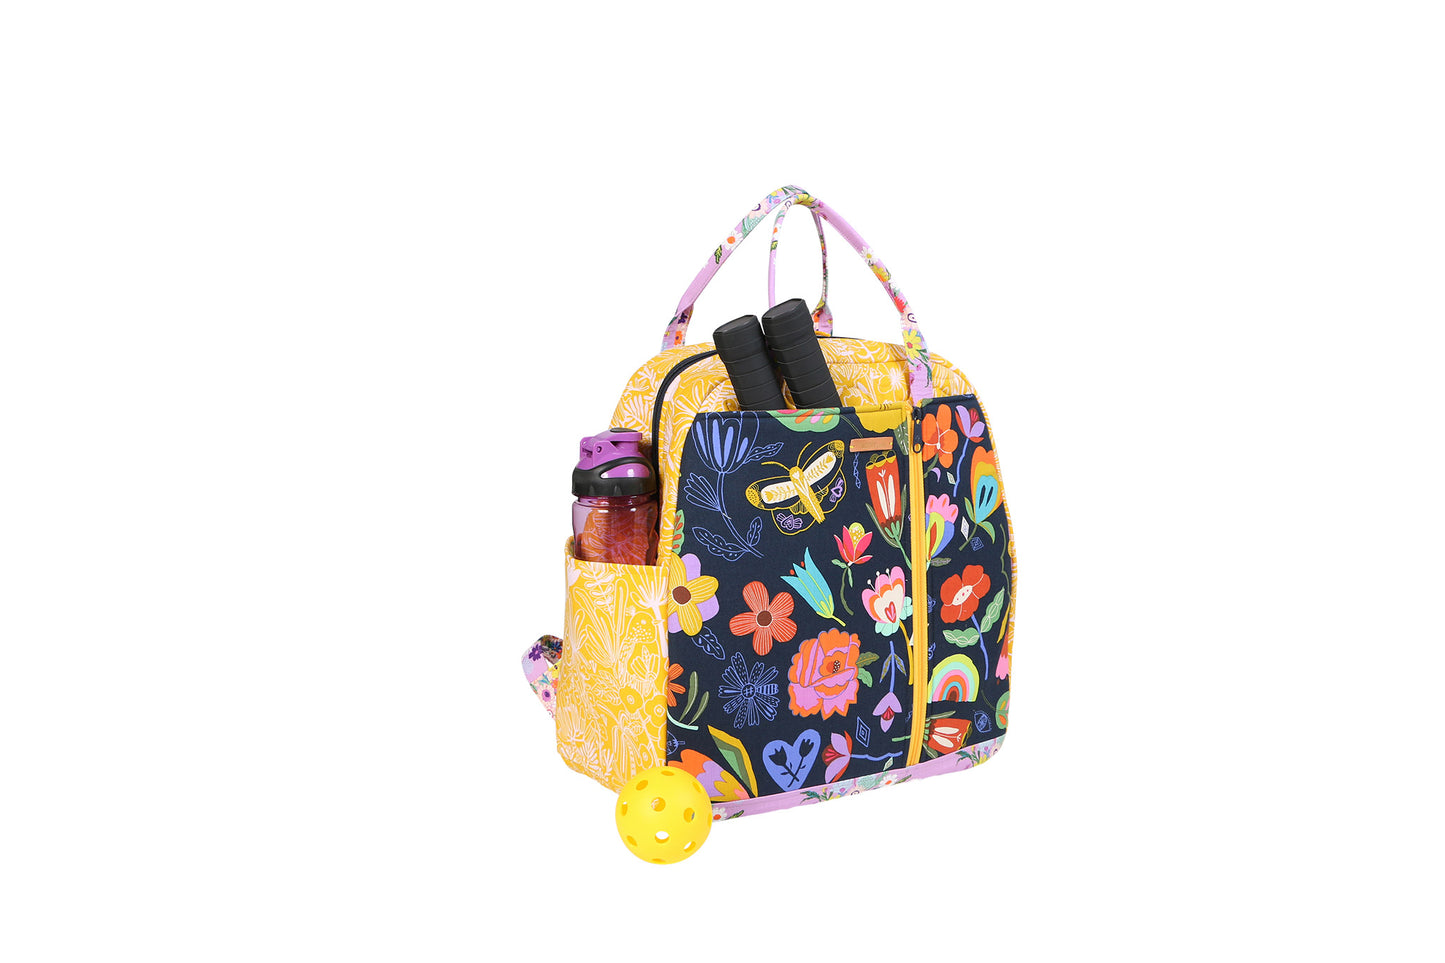 Courtside backpack/racket tote - Bags by Annie pattern